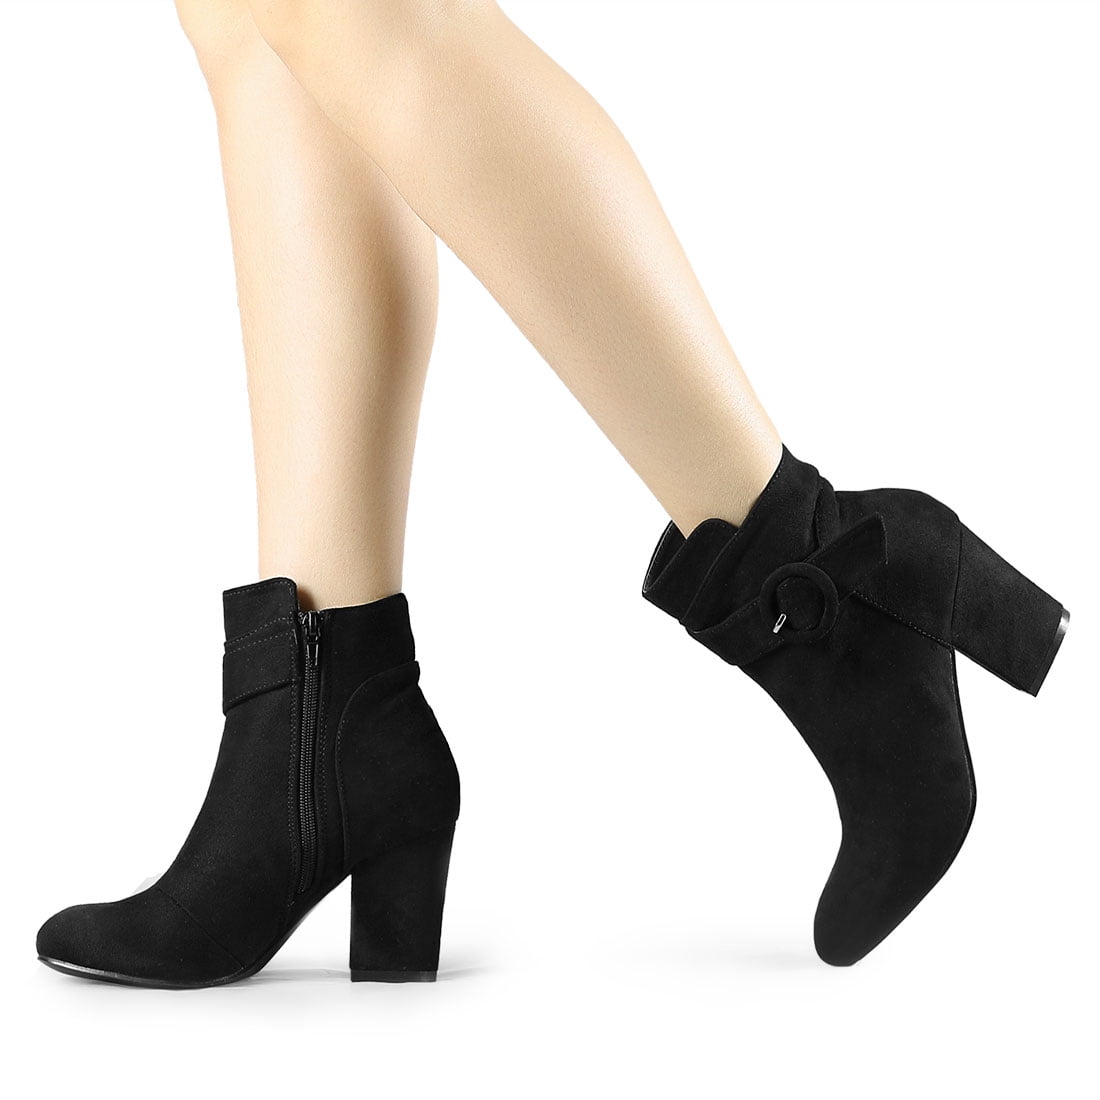 Details about  / Womens BLACK FASHION BOOTS Ankle Booties 2.5/" HIGH HEEL Buckle Zipper SIZE 8W